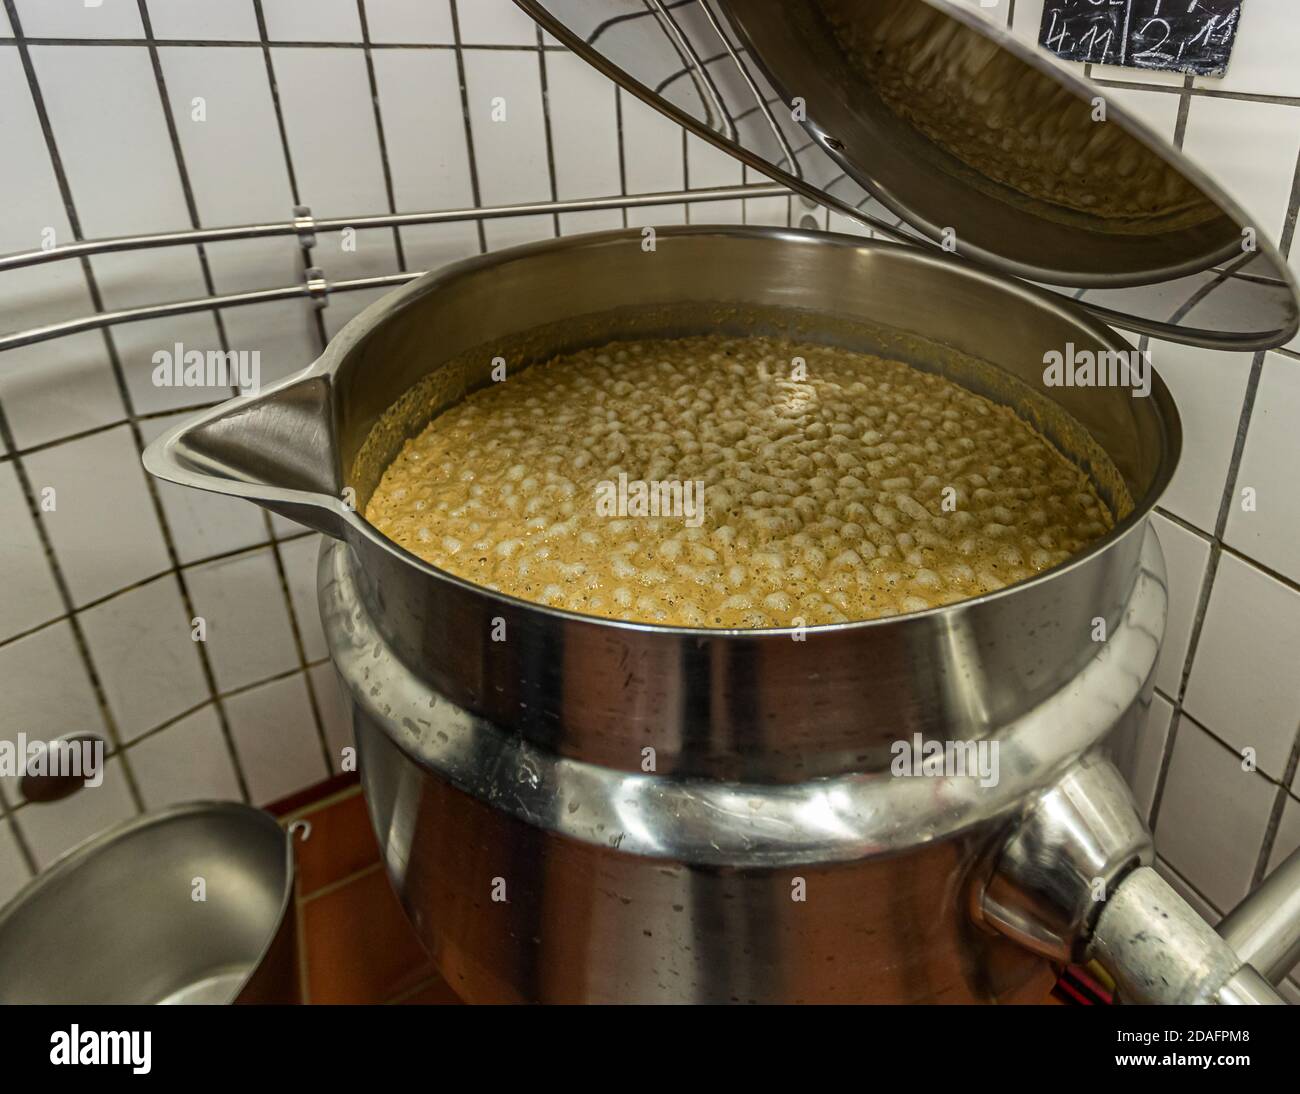 Large yeast jug at the Schlenkerla smoked beer brewery in Bamberg. Beer may only consist of water, hops and barley. Yeast was not mentioned in the 1516 decree. Heller Brewery of Schlenkerla Smoke Beer Bamberg, Germany Stock Photo